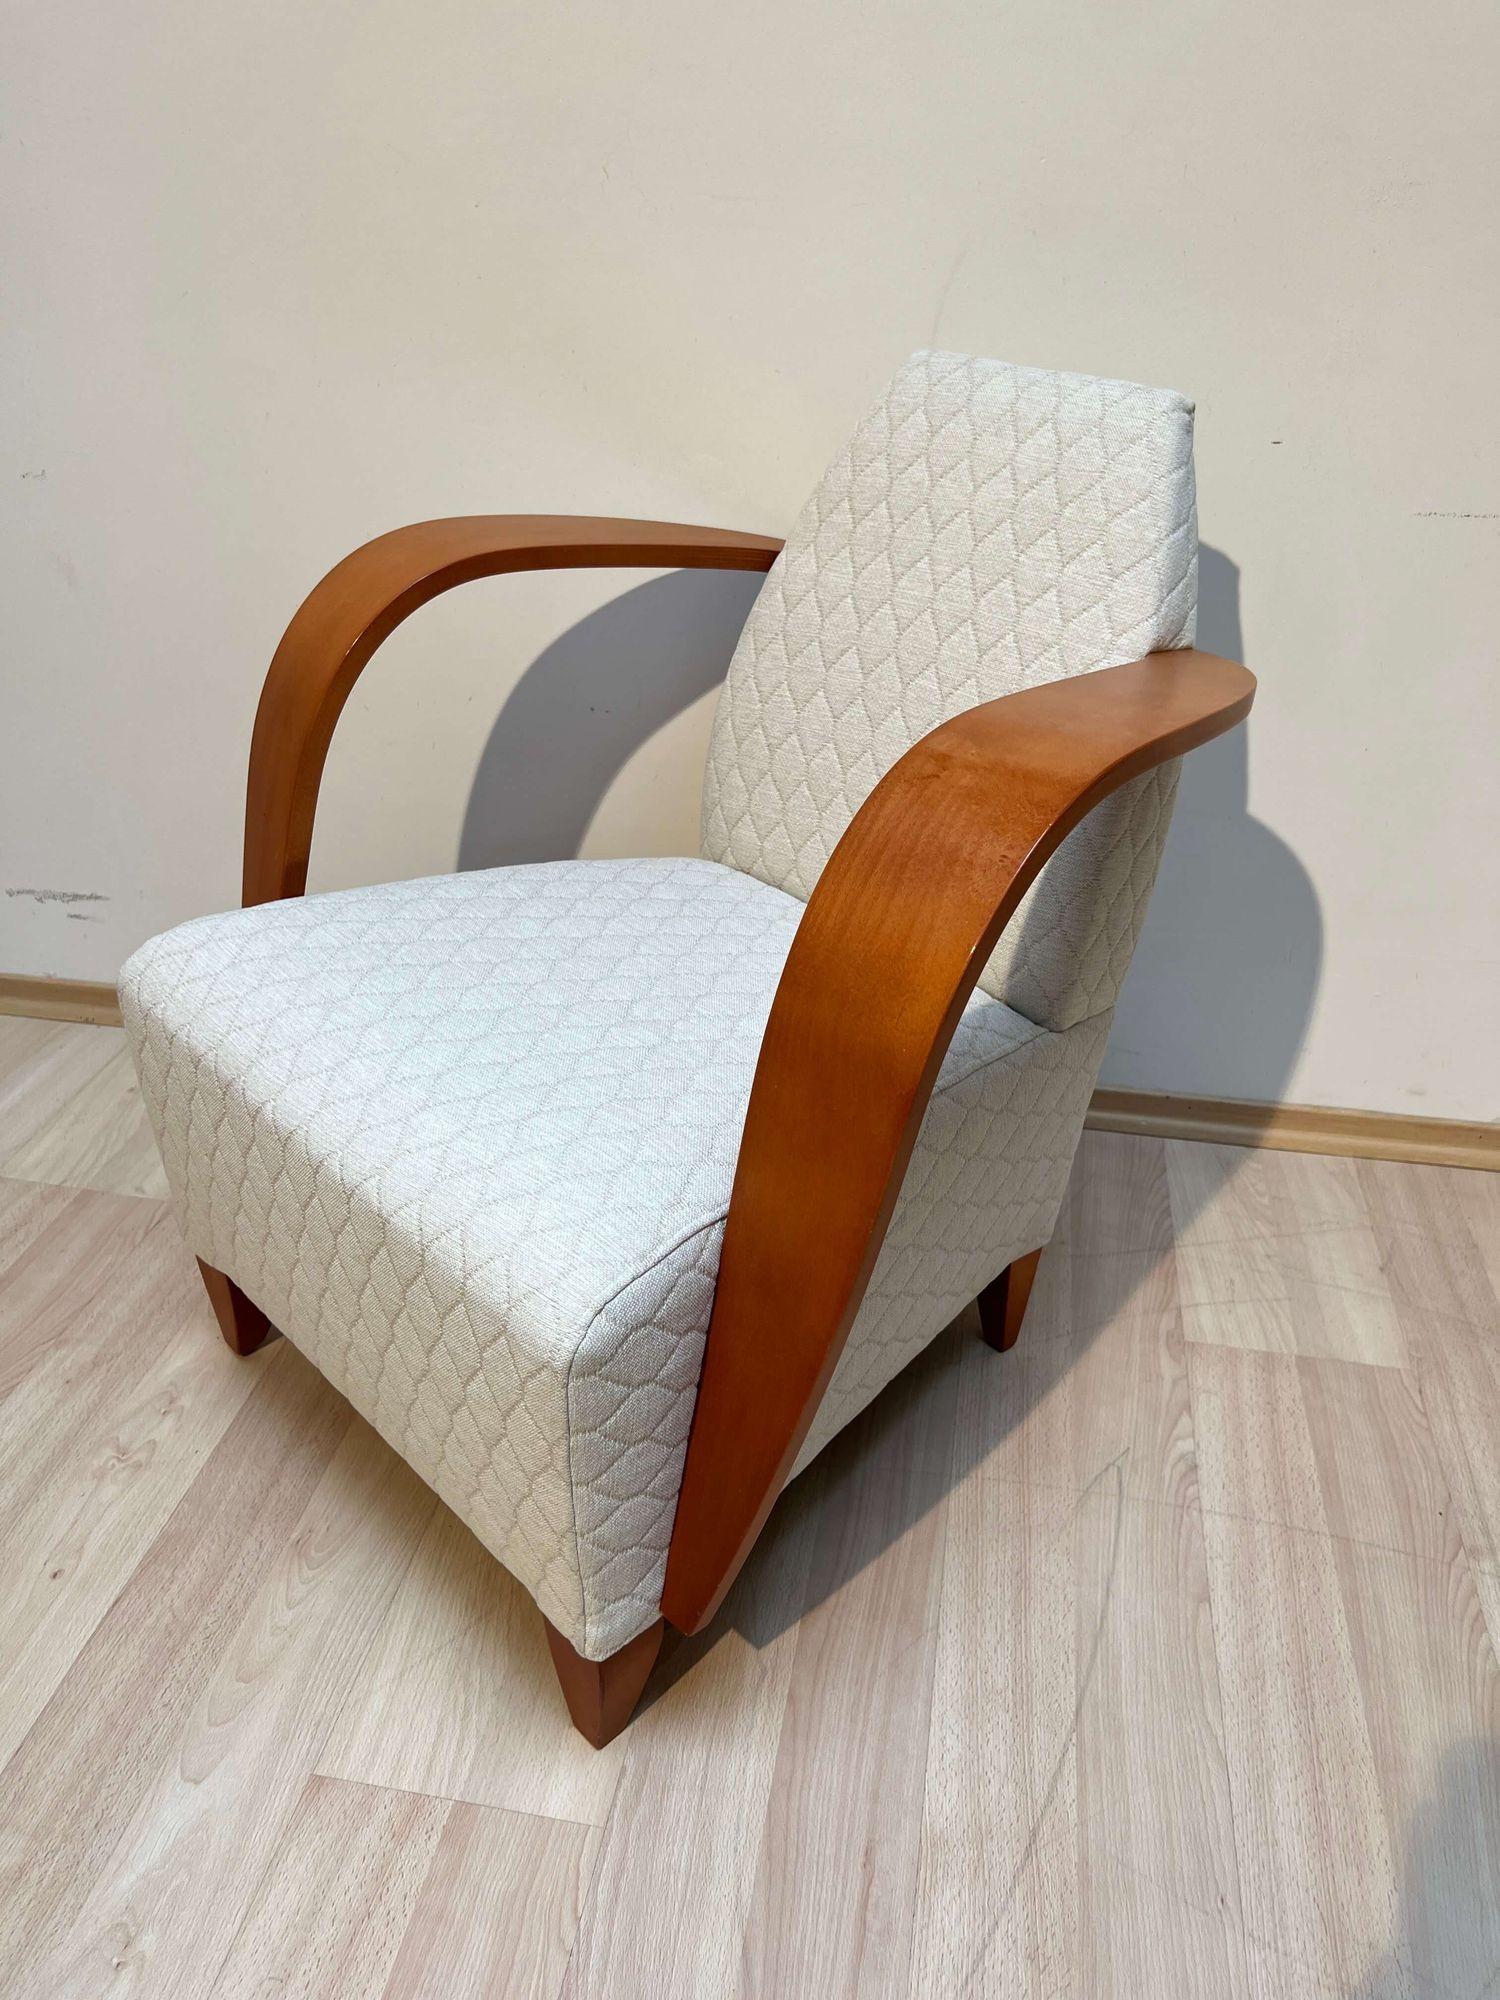 Design Arm Chair, Beech Wood, Cream-white Quilt Fabric, Spain, 1990s For Sale 4